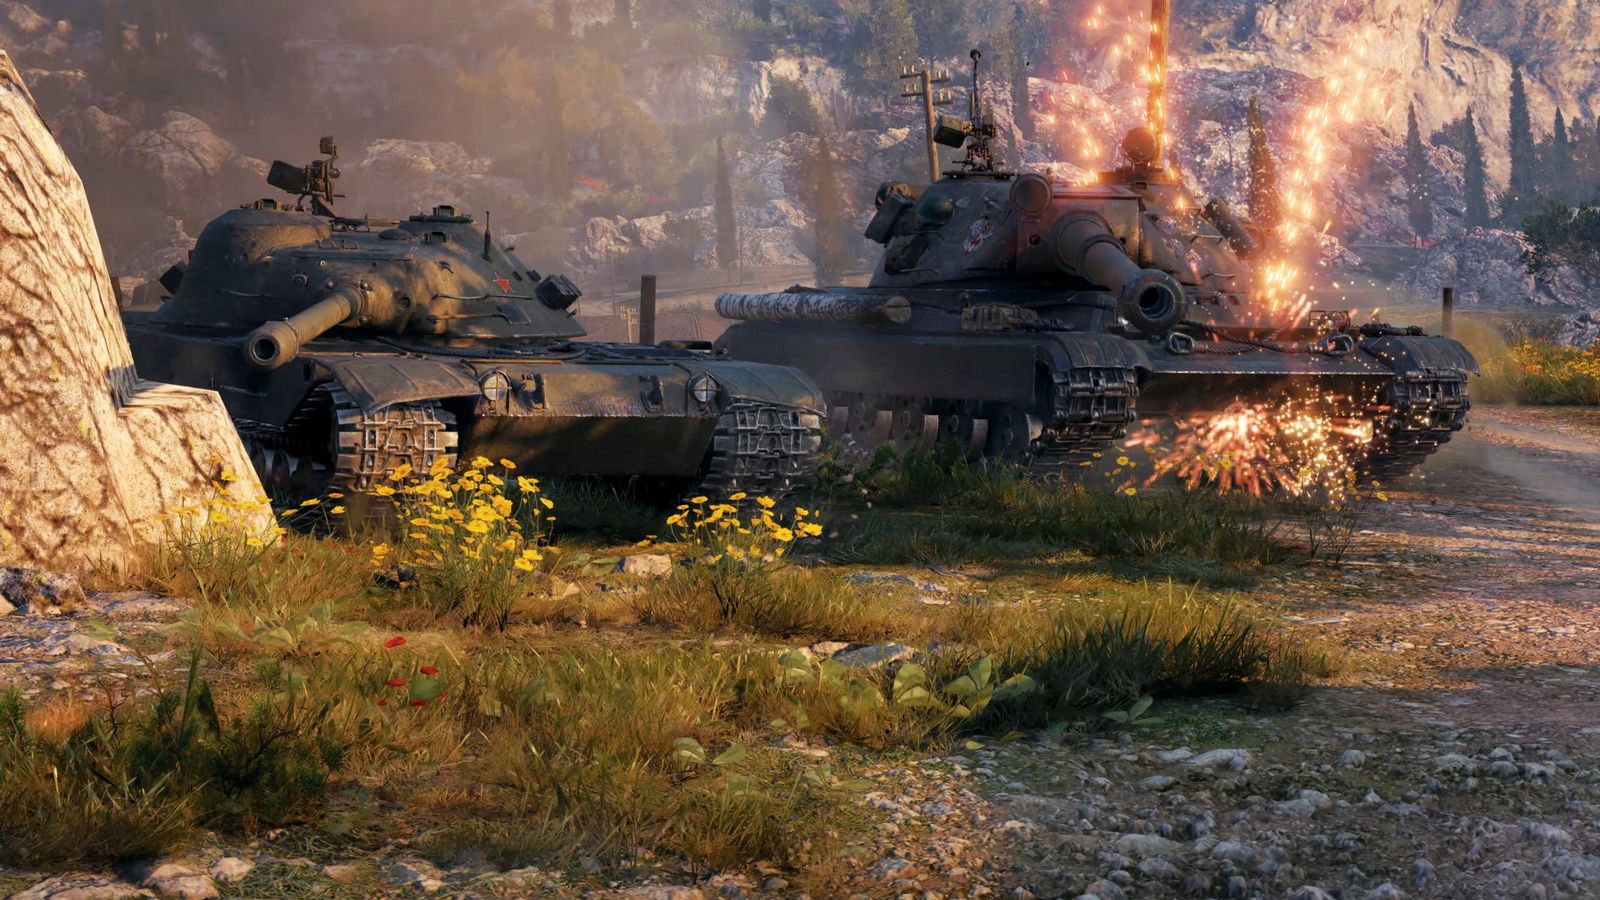 Image of two tanks in a forest in World of Tanks.